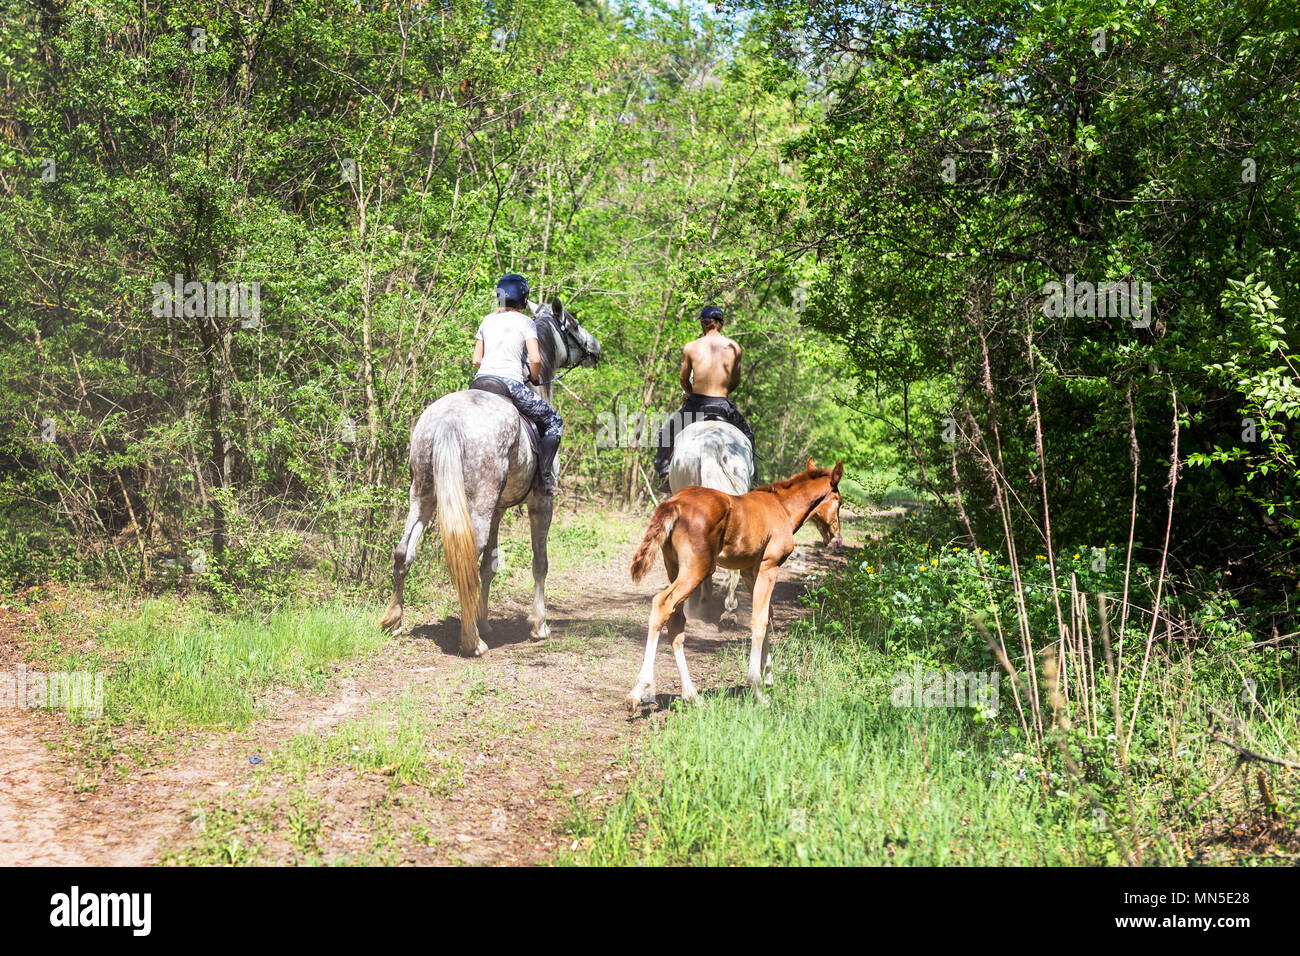 Two riders walking in green forest by horses. Little cute foal following adults. Back view. Summer family activity concept Stock Photo